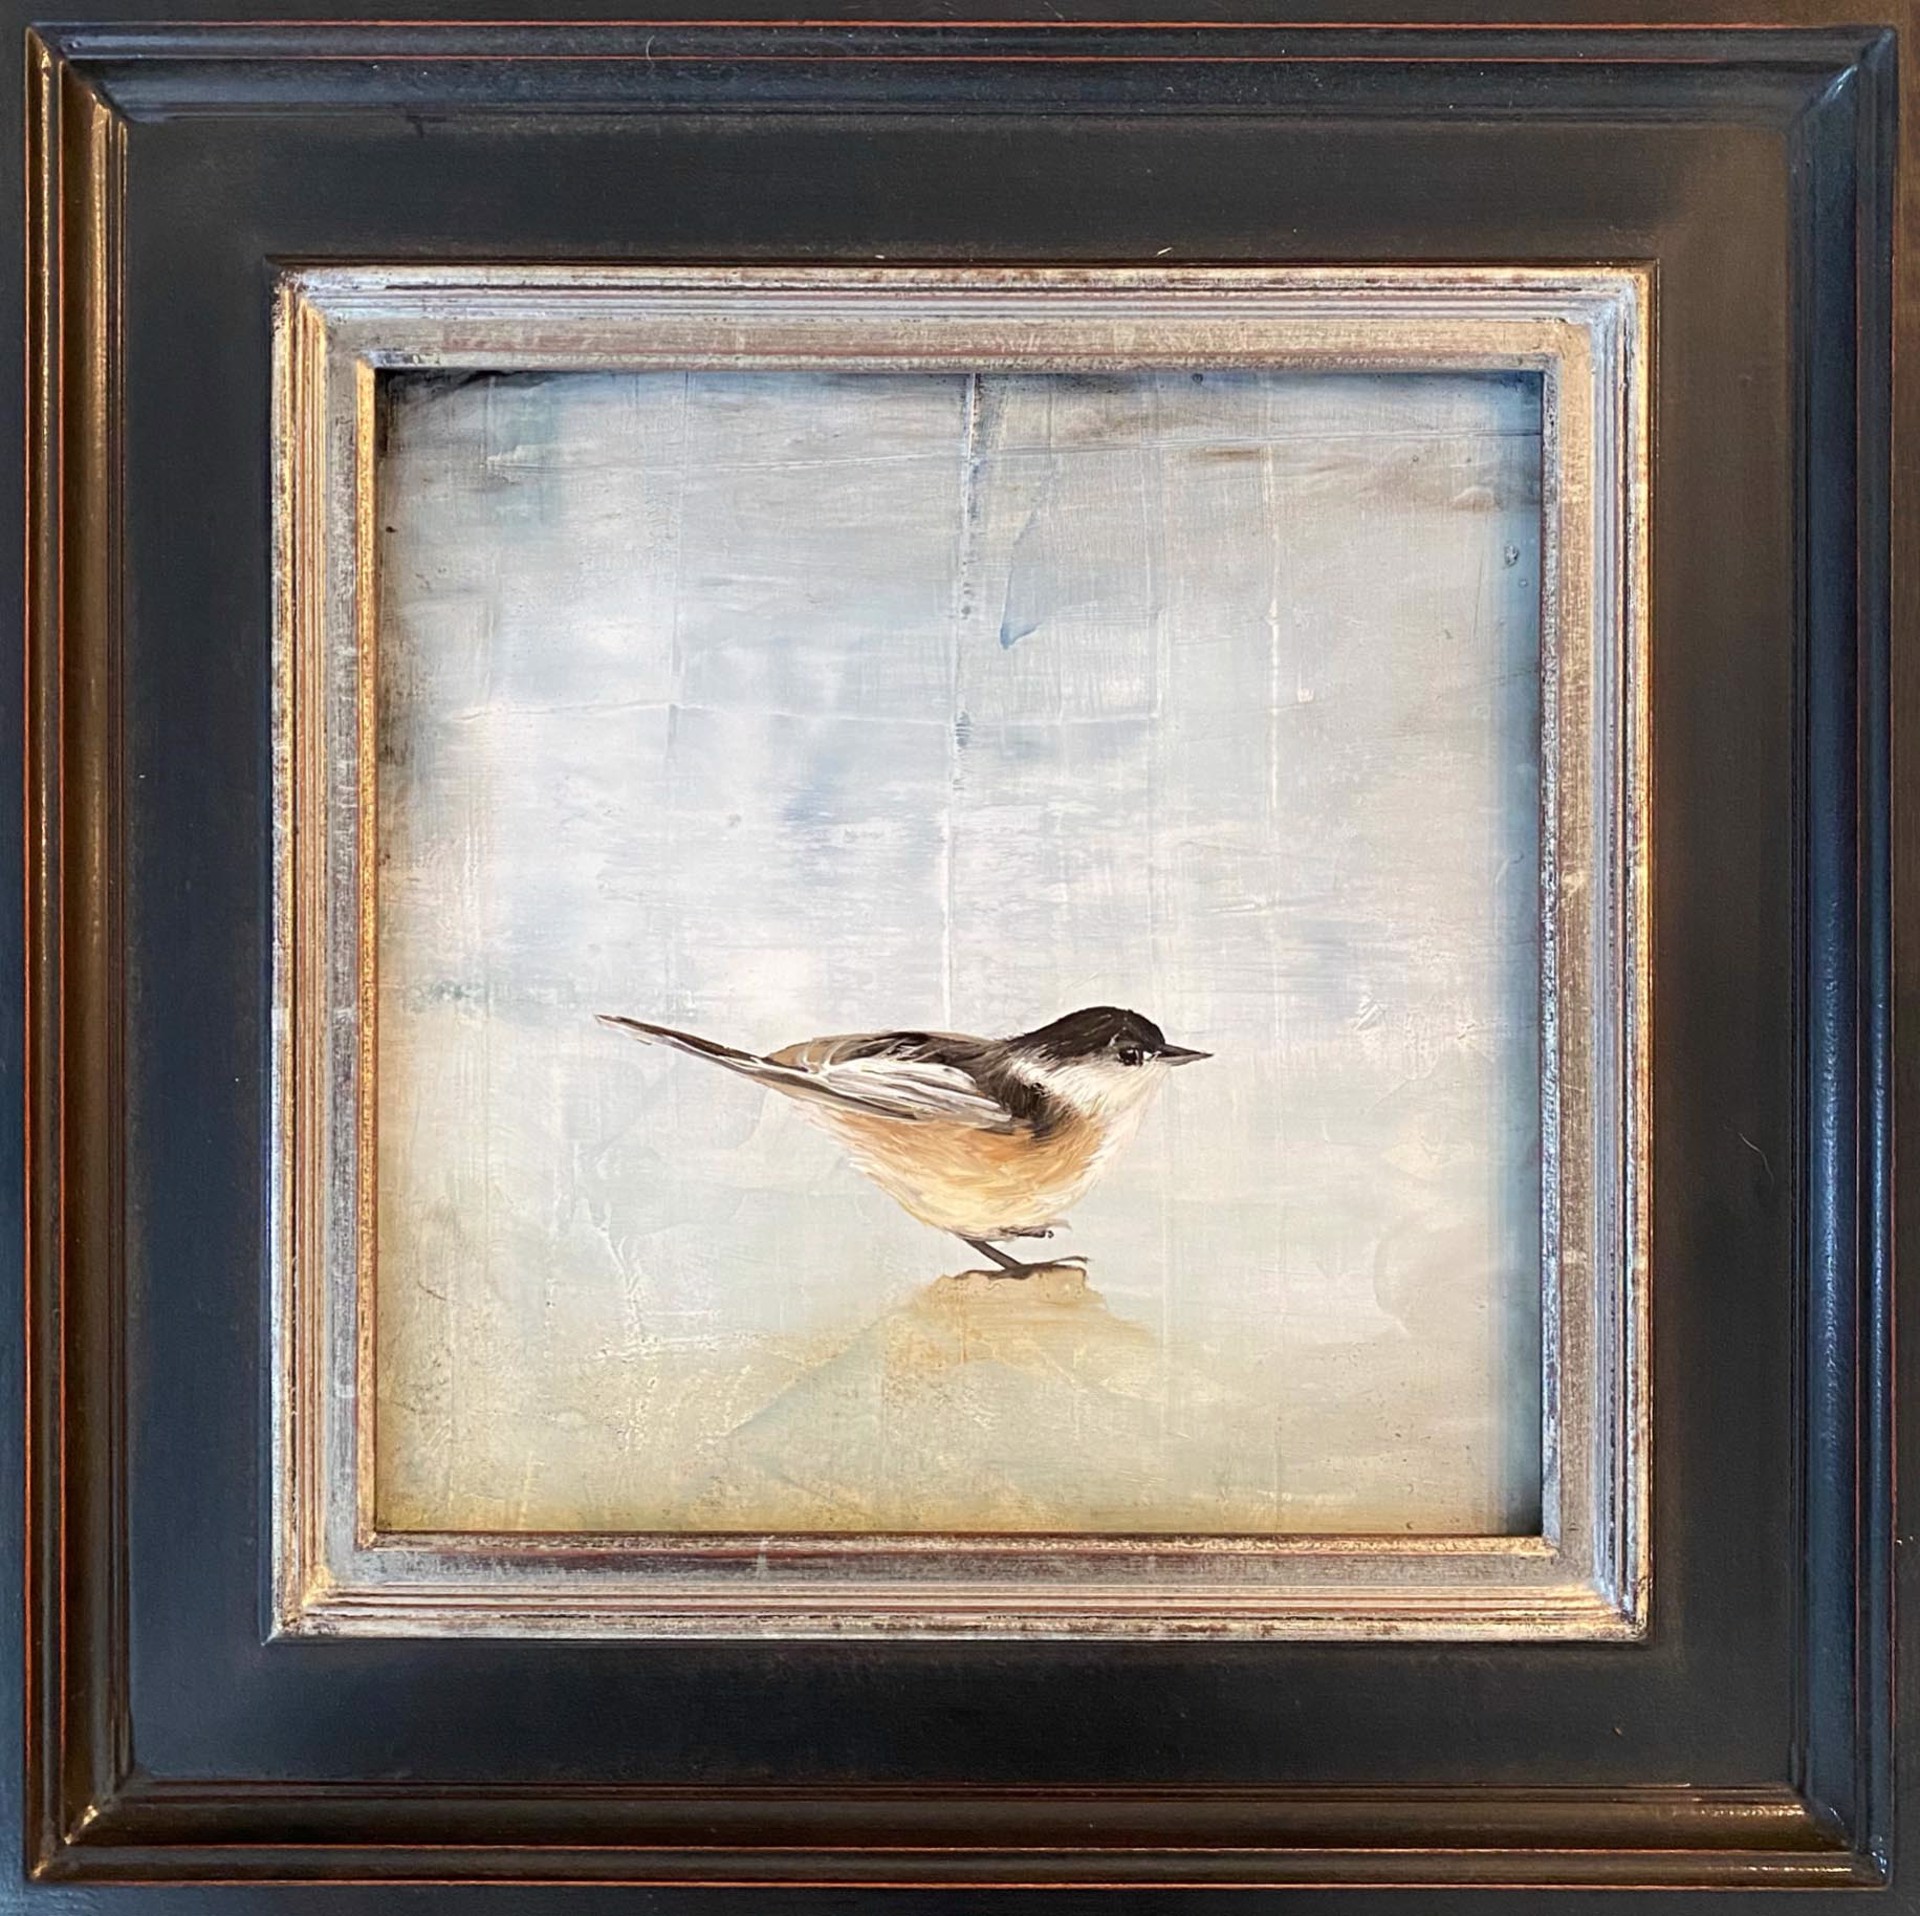 Original Contemporary Oil Painting Of A Chickadee On A Abstract Gray And Tan Background